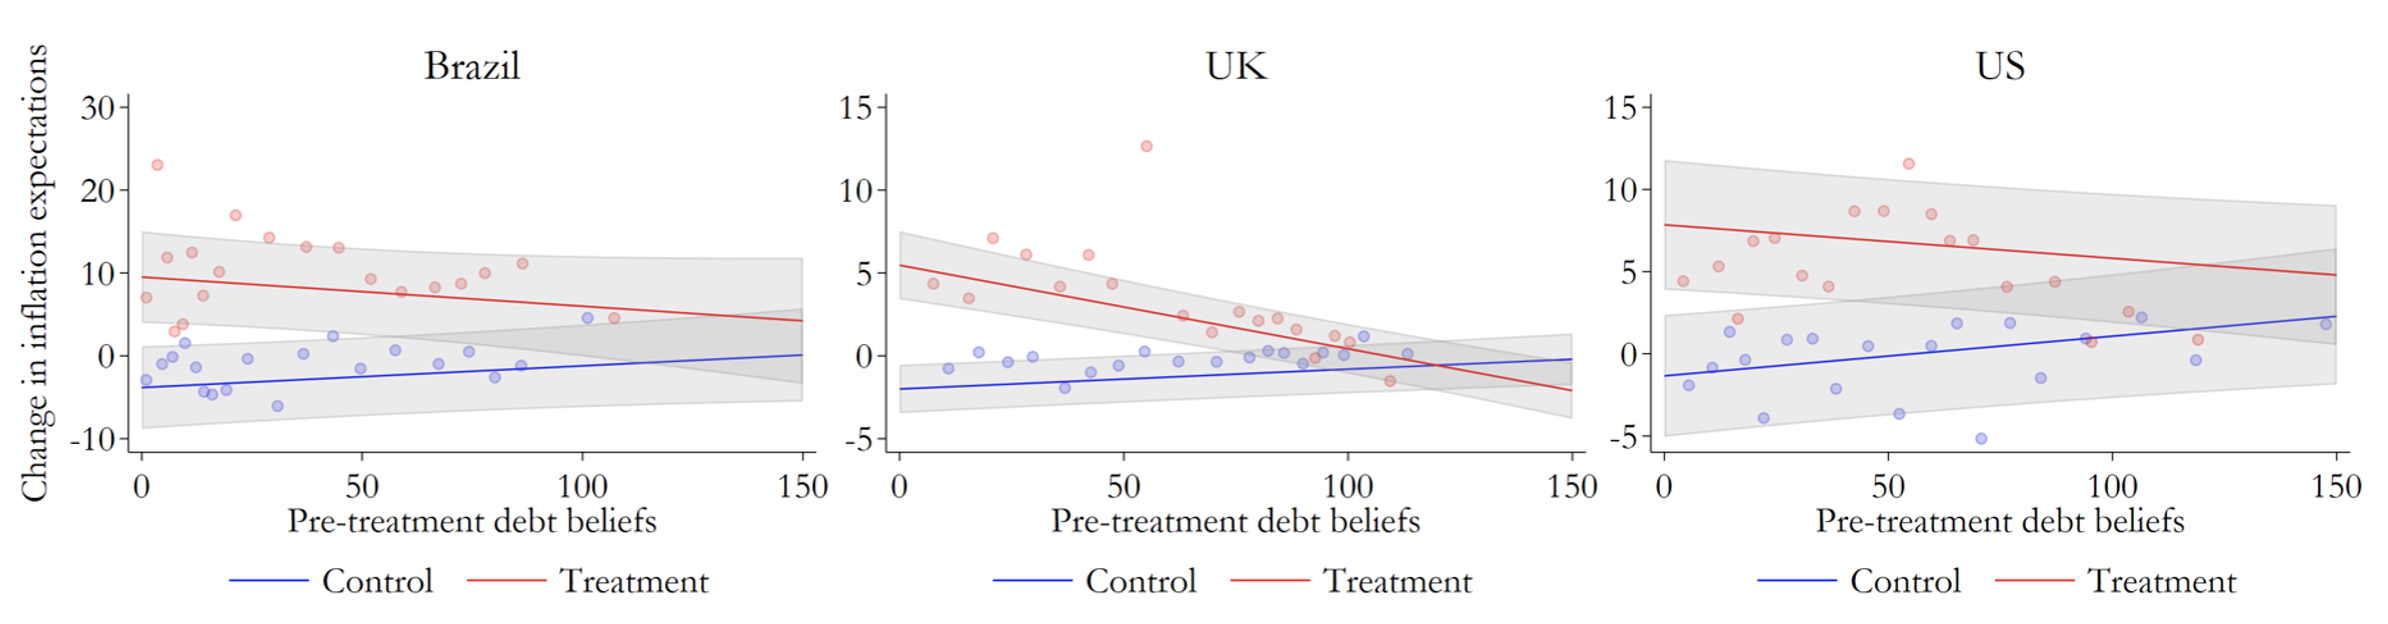 Figure 1 Change in inflation expectations depending on pre-treatment debt beliefs